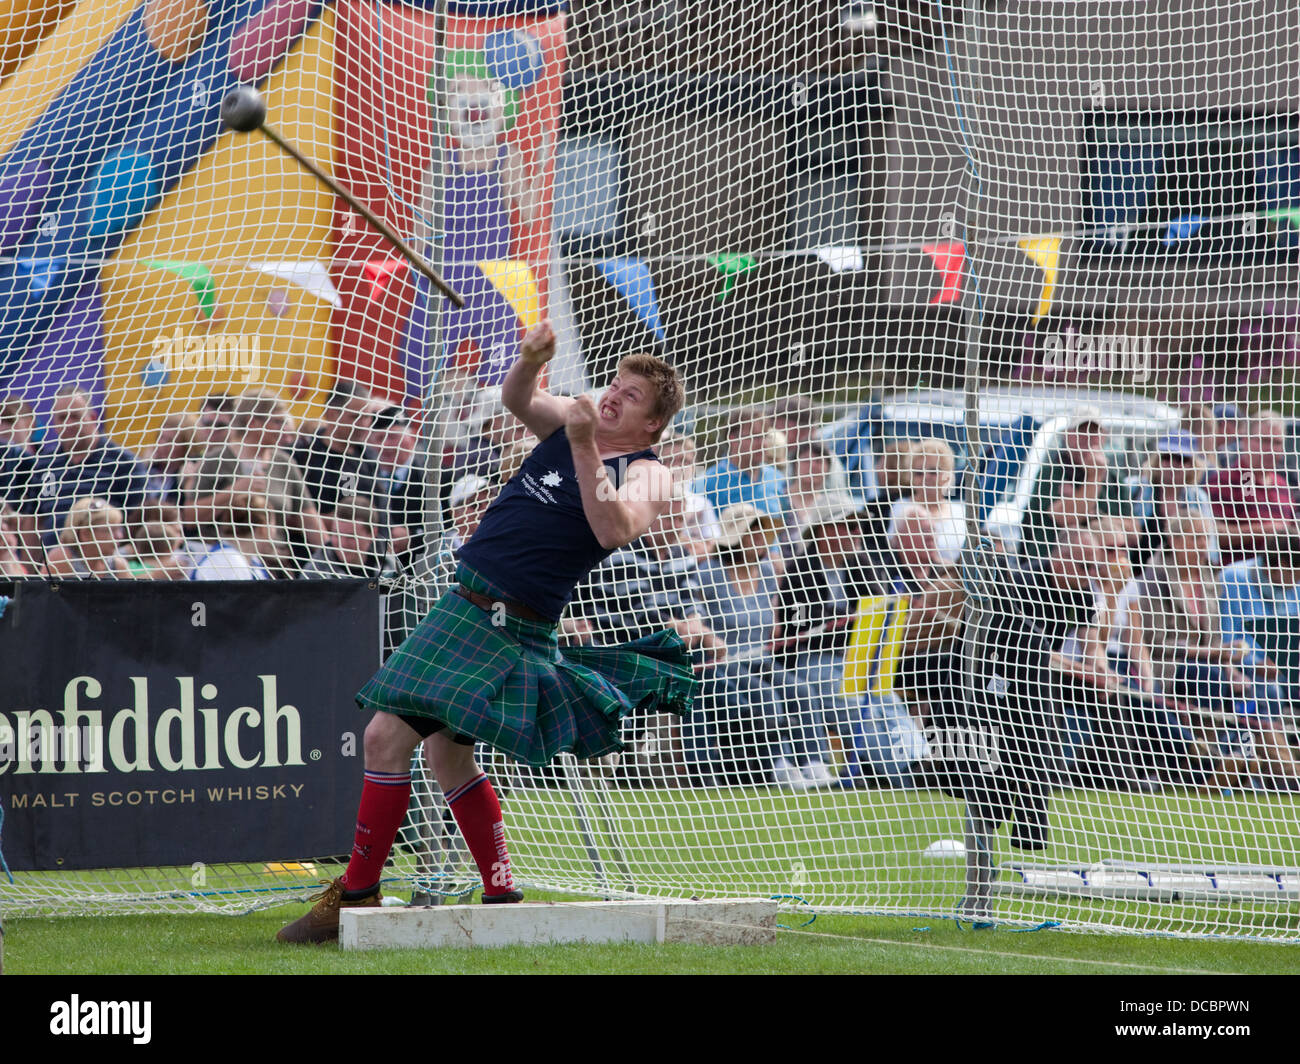 Ballater, Scotland - August 8th 2013: A competitor performing the hammer throw at the Ballater Highland Games. Stock Photo